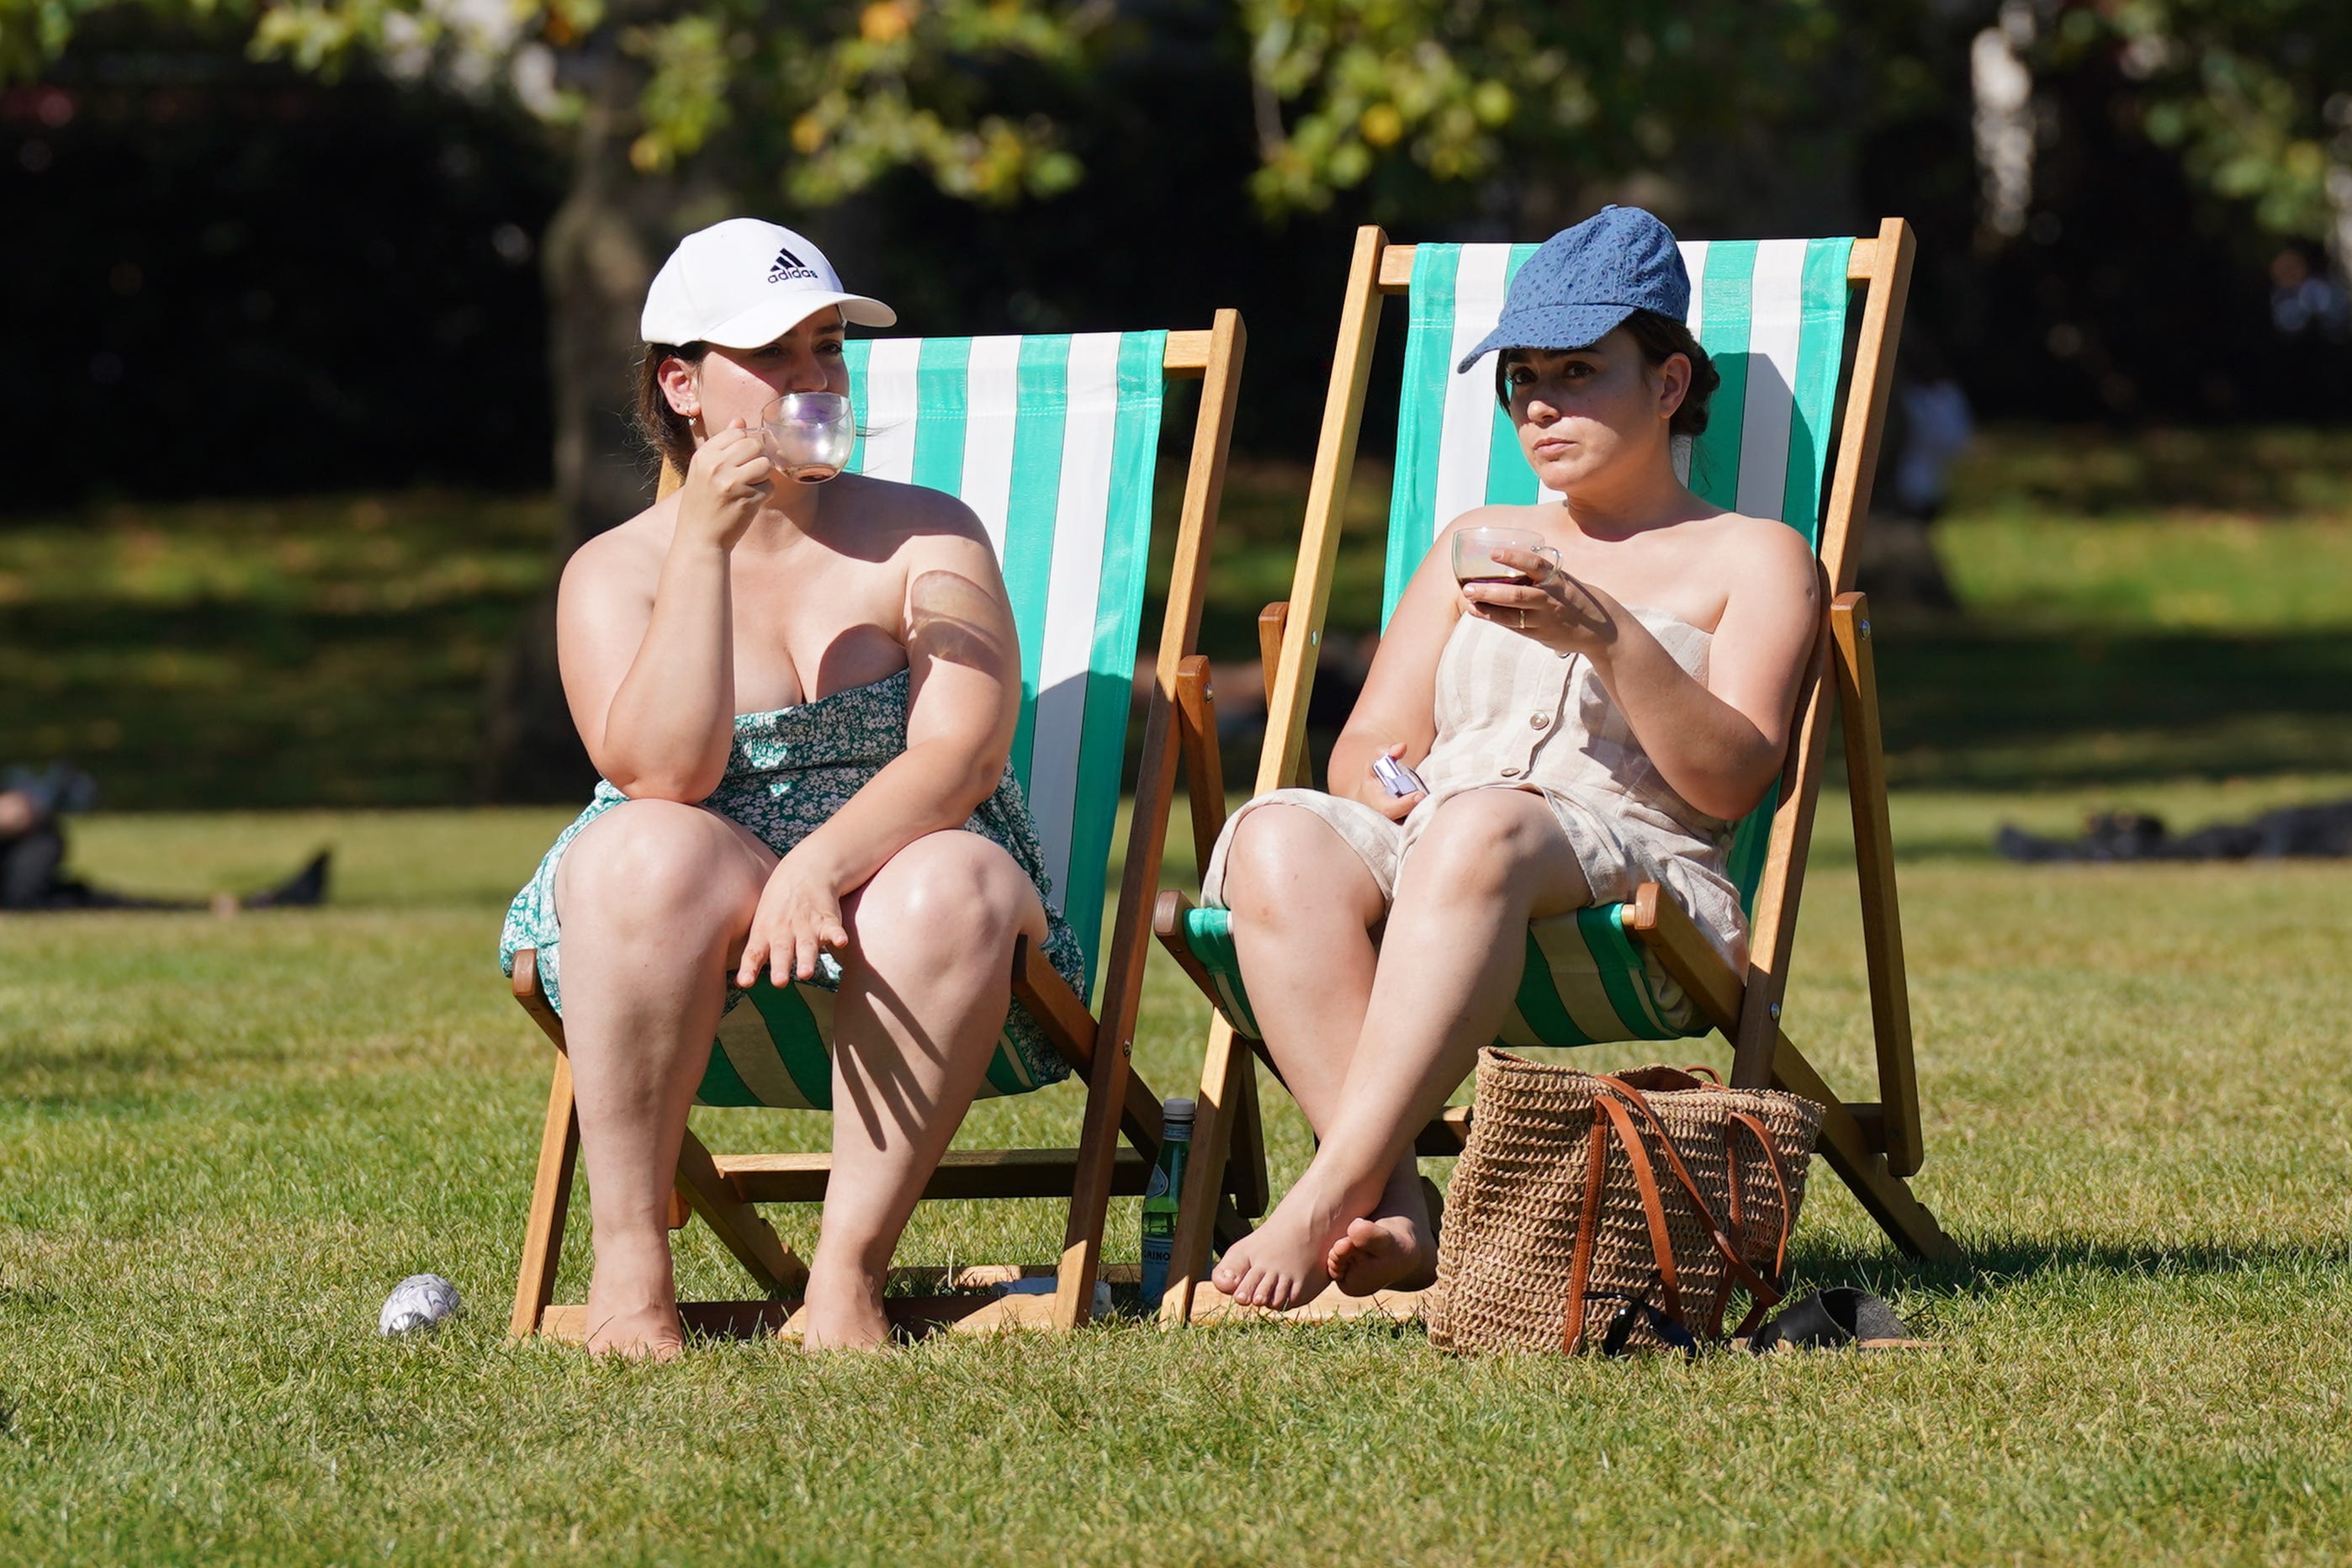 People enjoying the hot weather in Green Park, central London (Lucy North/PA)